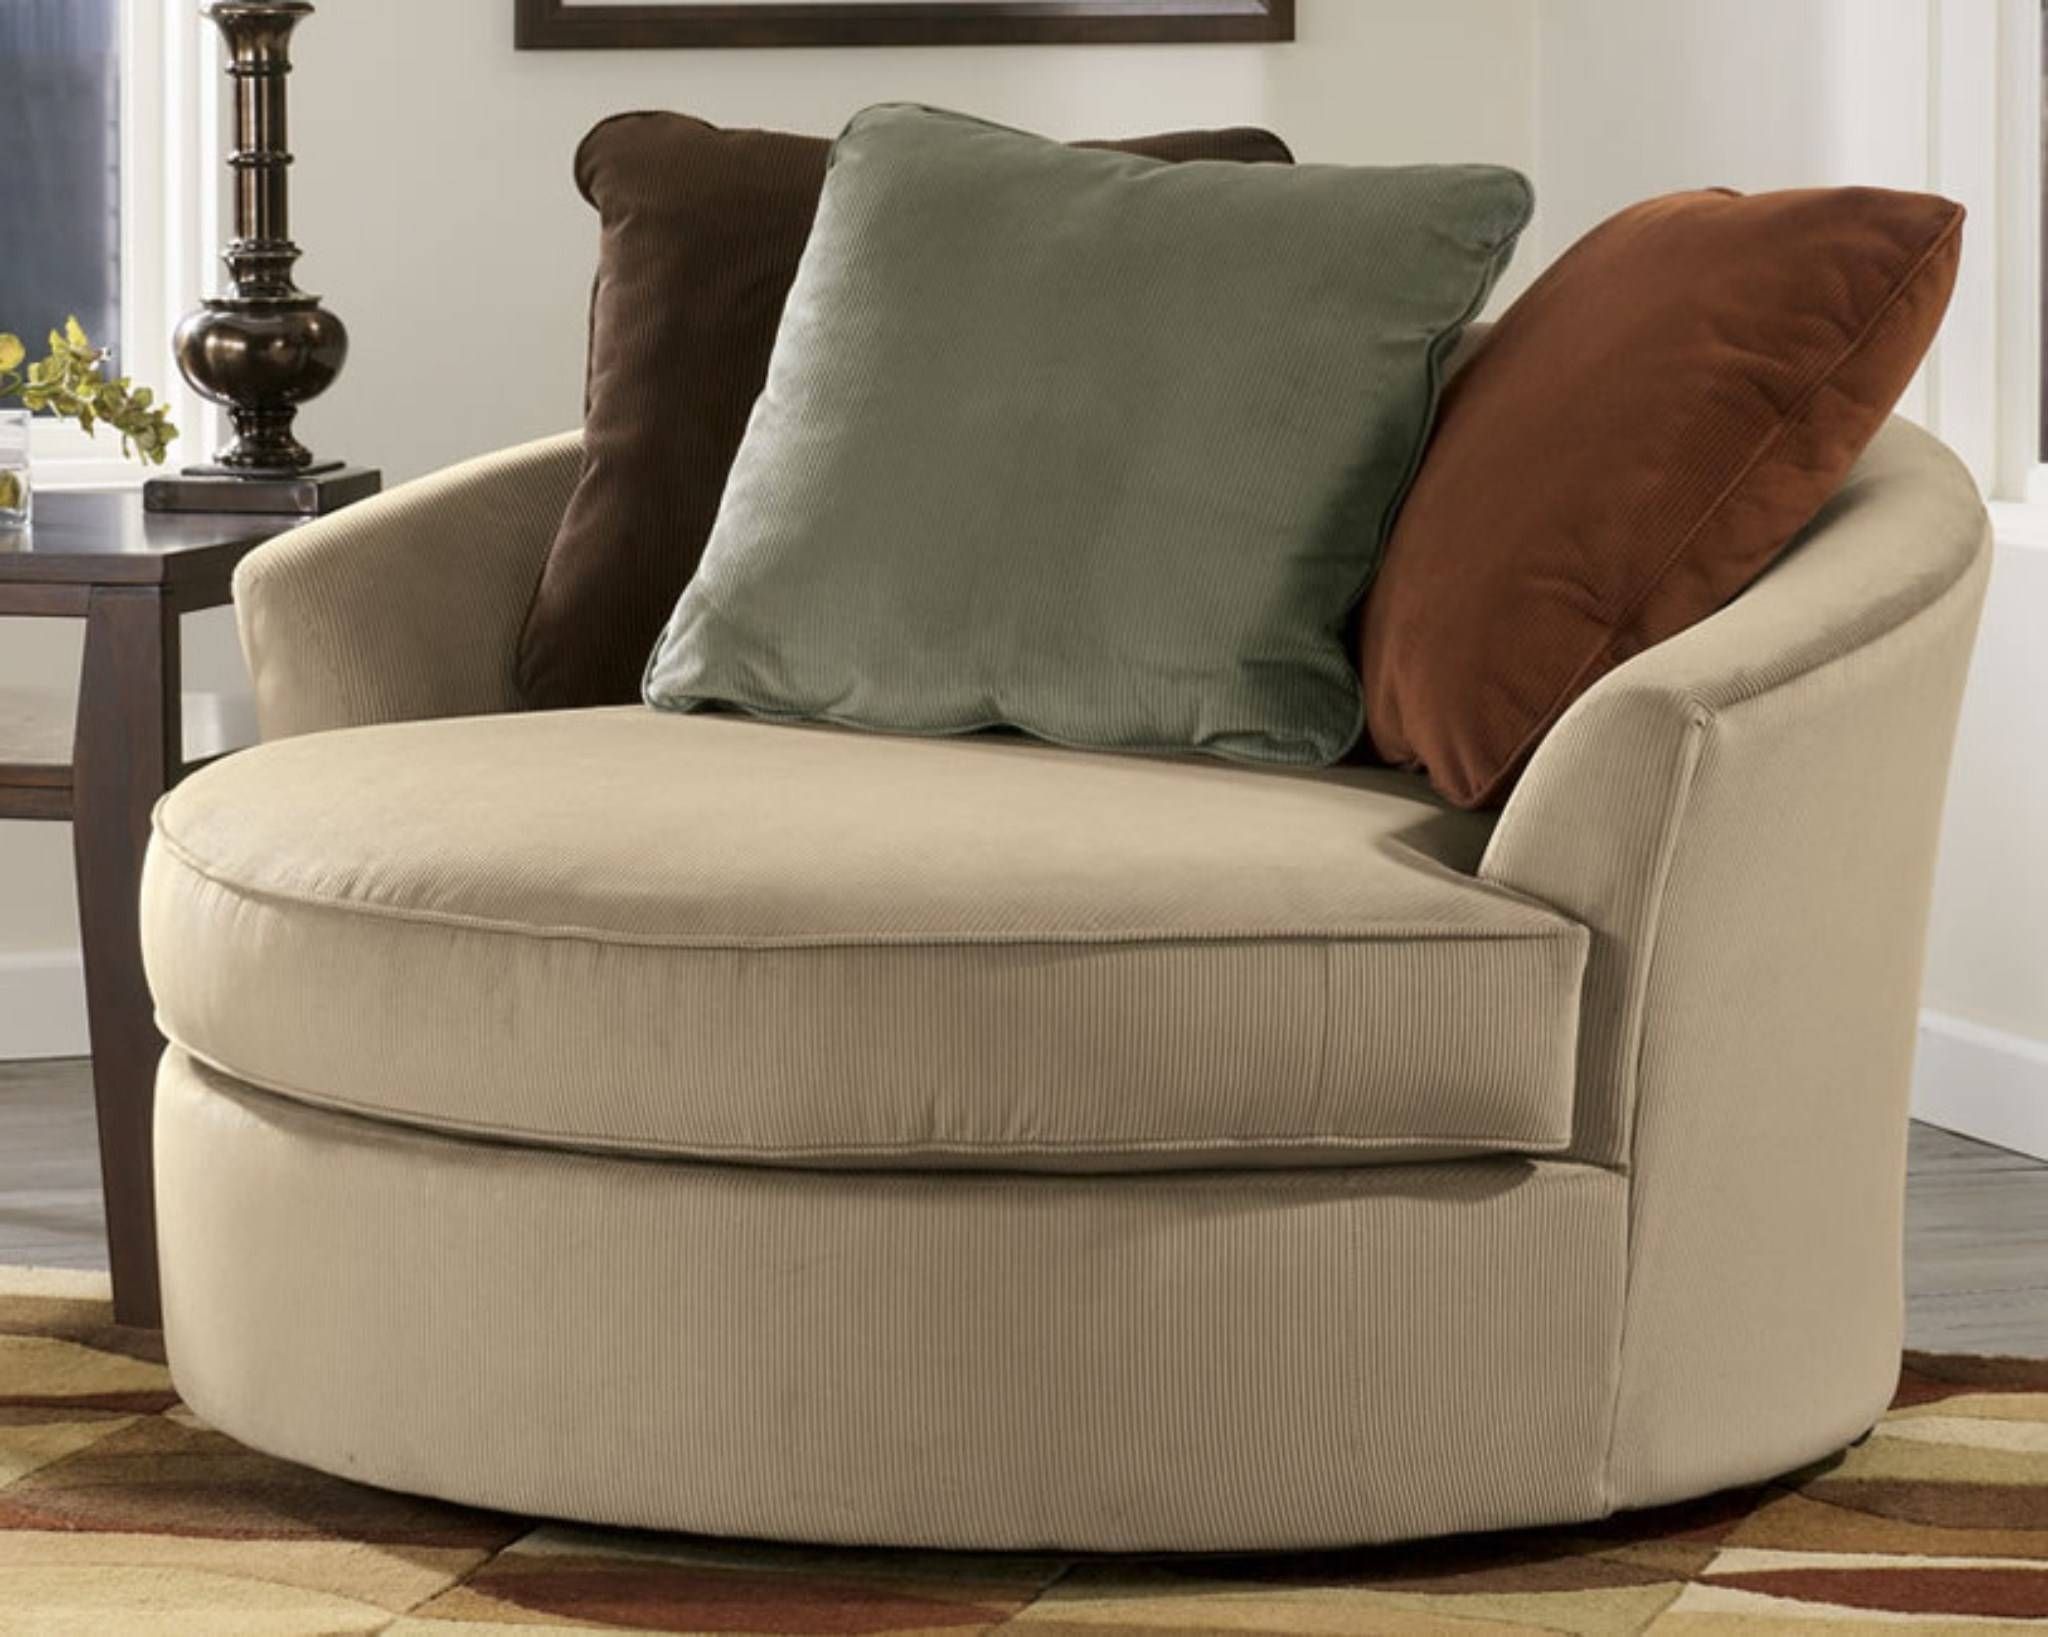 Sofas Center : Imposing Oversized Sofa Chair Images Design Chairs With Regard To Large Sofa Chairs (Photo 1 of 30)